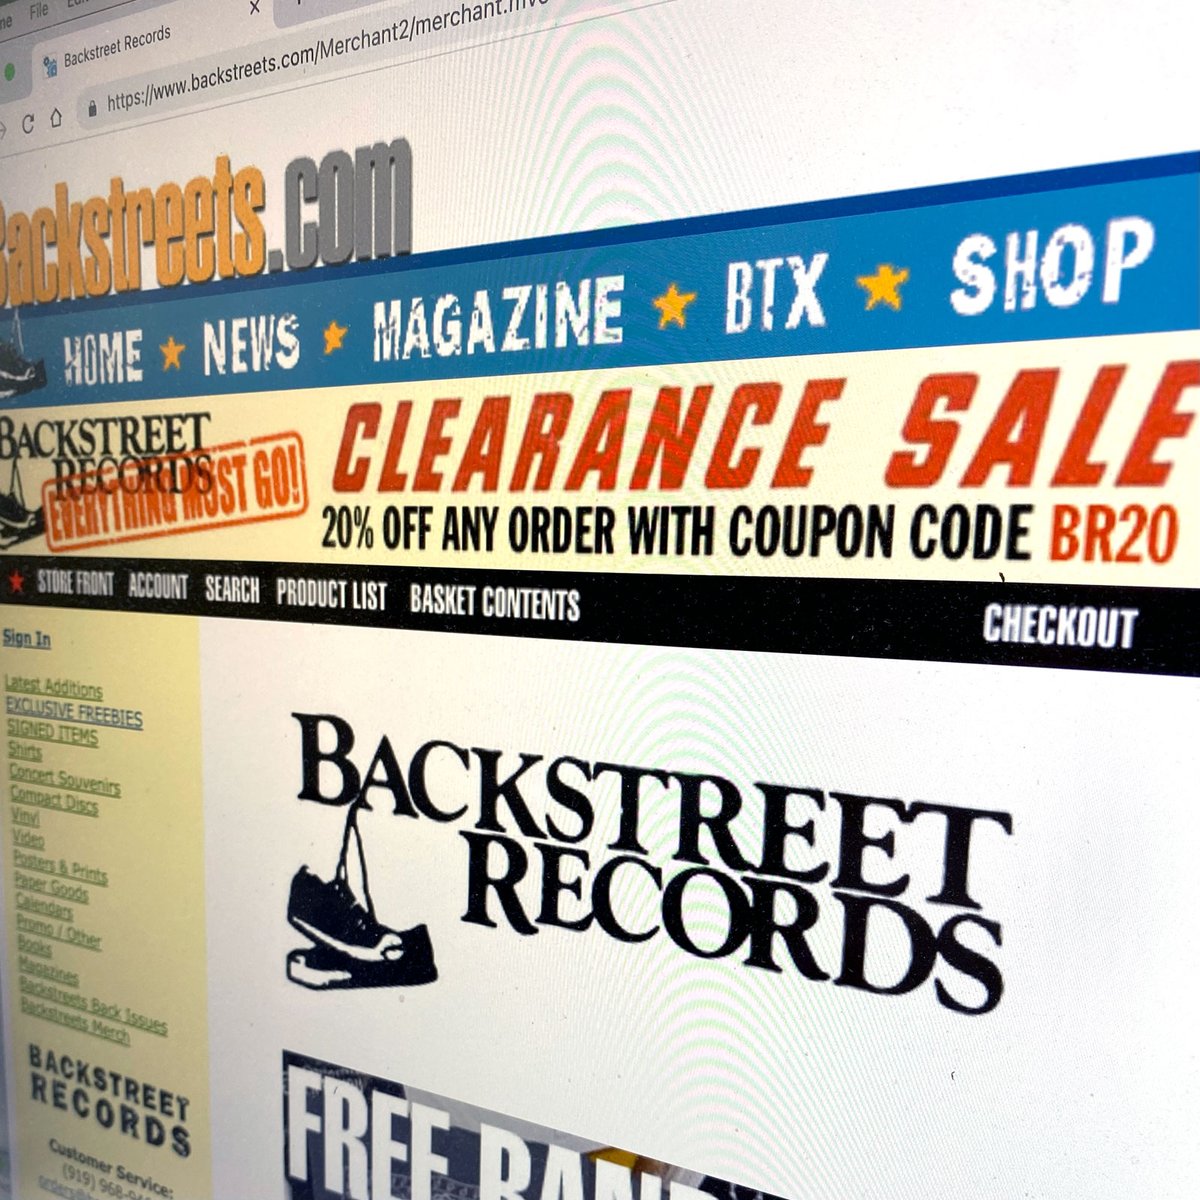 New markdowns: 20% OFF ALL ITEMS in stock at Backstreet Records. Everything must go! Use coupon code BR20 to apply the discount at checkout. Applies to items already sale-priced, too. backstreets.com/Merchant2/merc… #springsteen